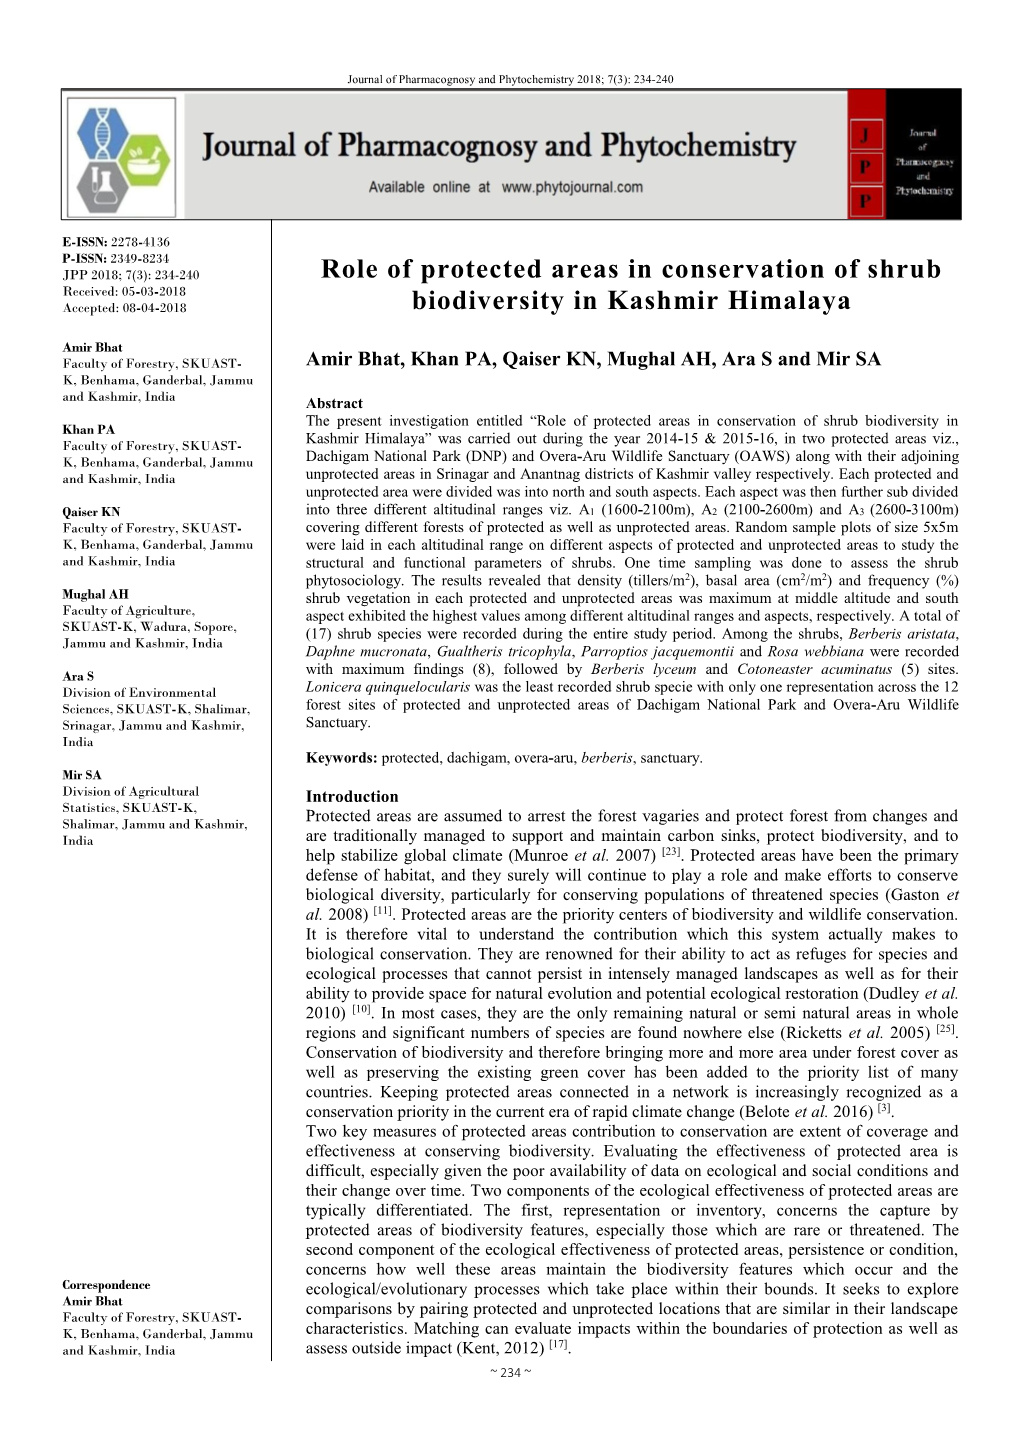 Role of Protected Areas in Conservation of Shrub Biodiversity In